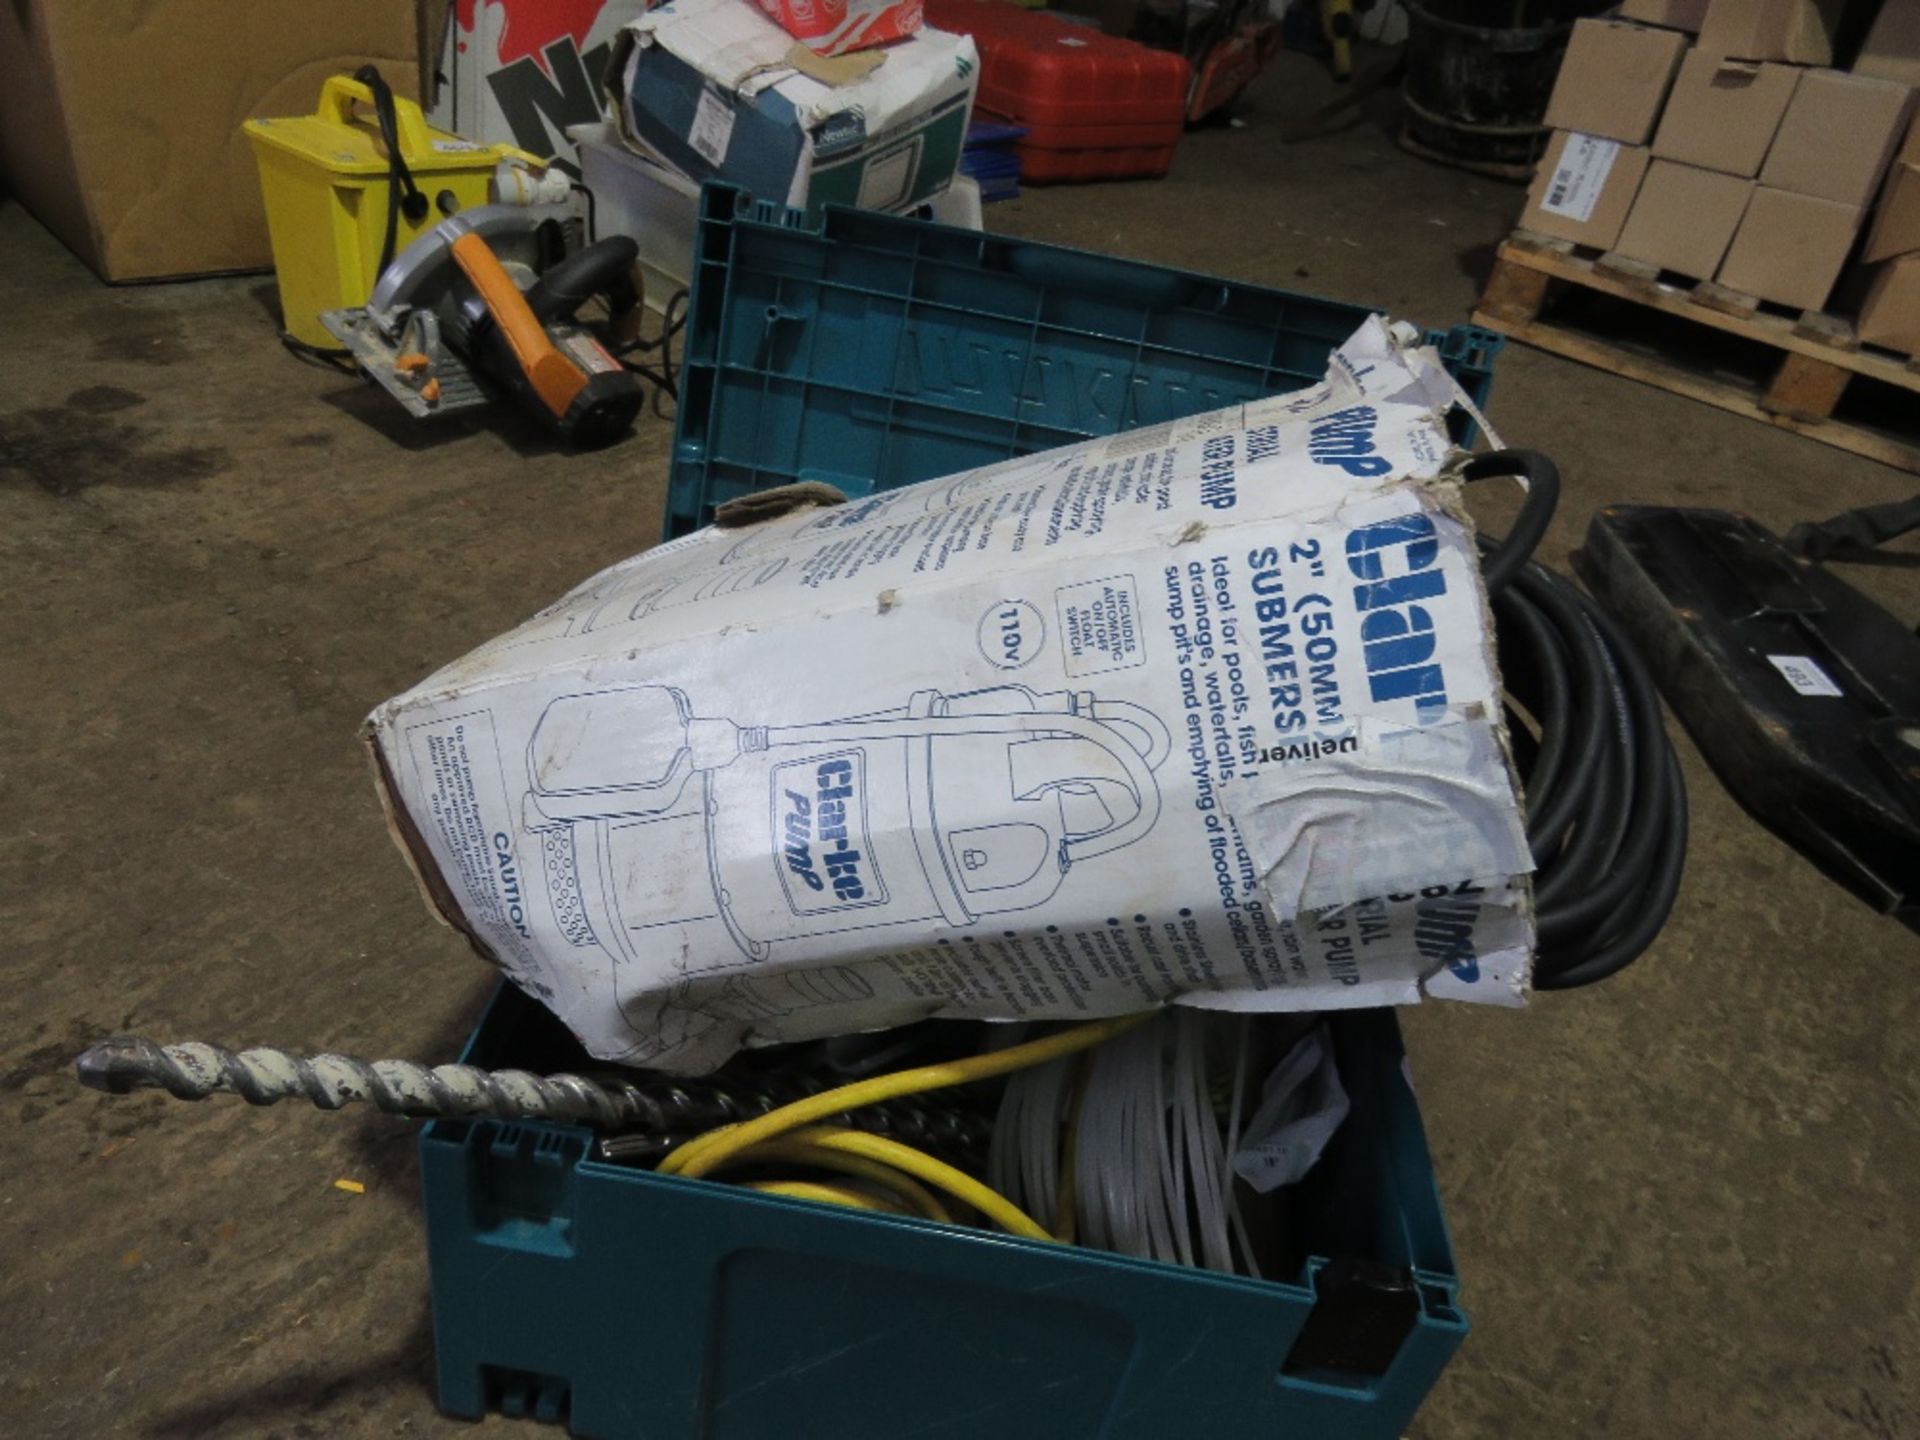 SUBMERSIBLE PUMP 110V AND BAG OF SUNDRIES.